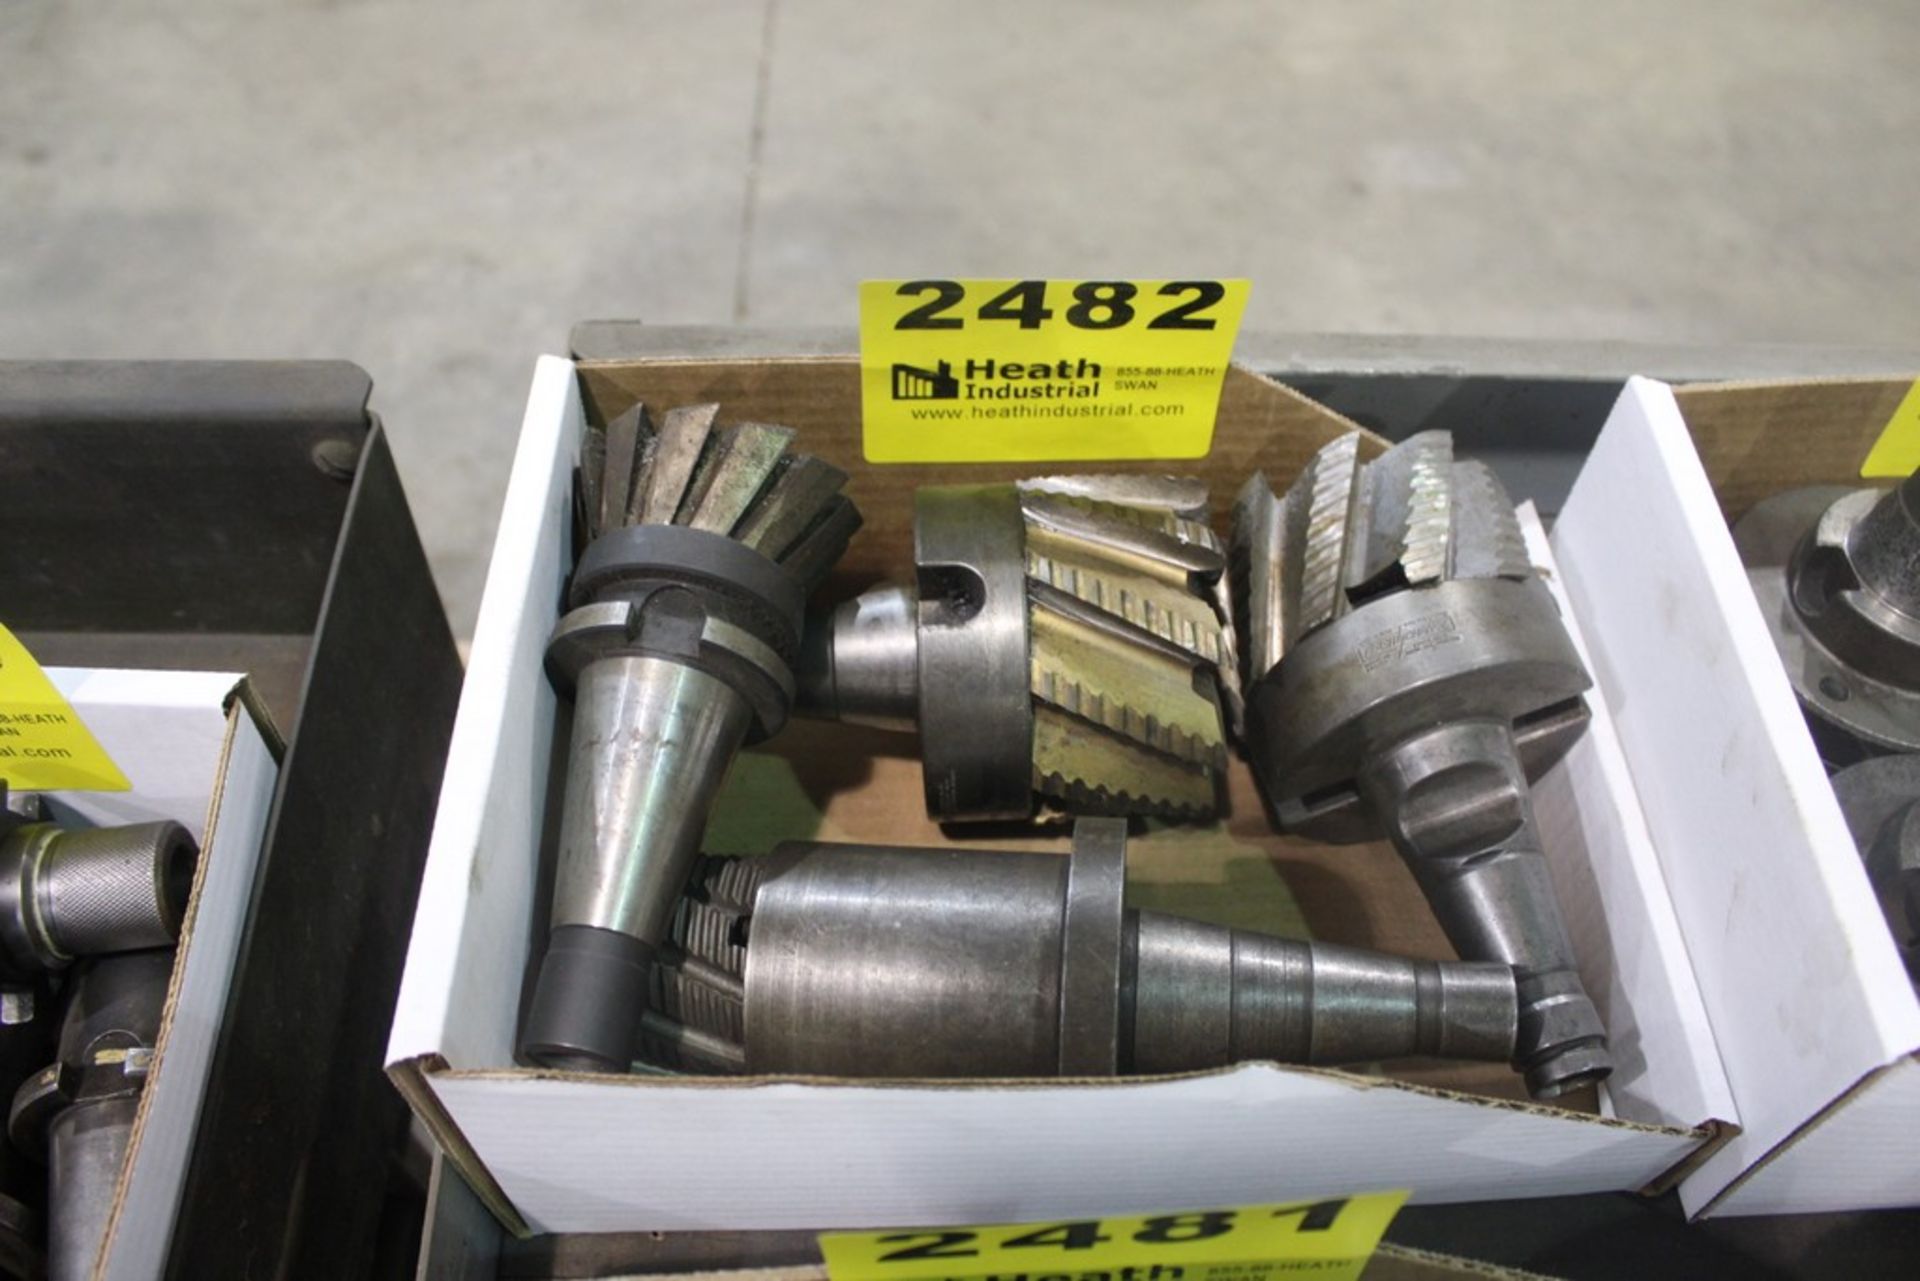 (4) 40 TAPER TOOL HOLDERS WITH SHELL MILLS